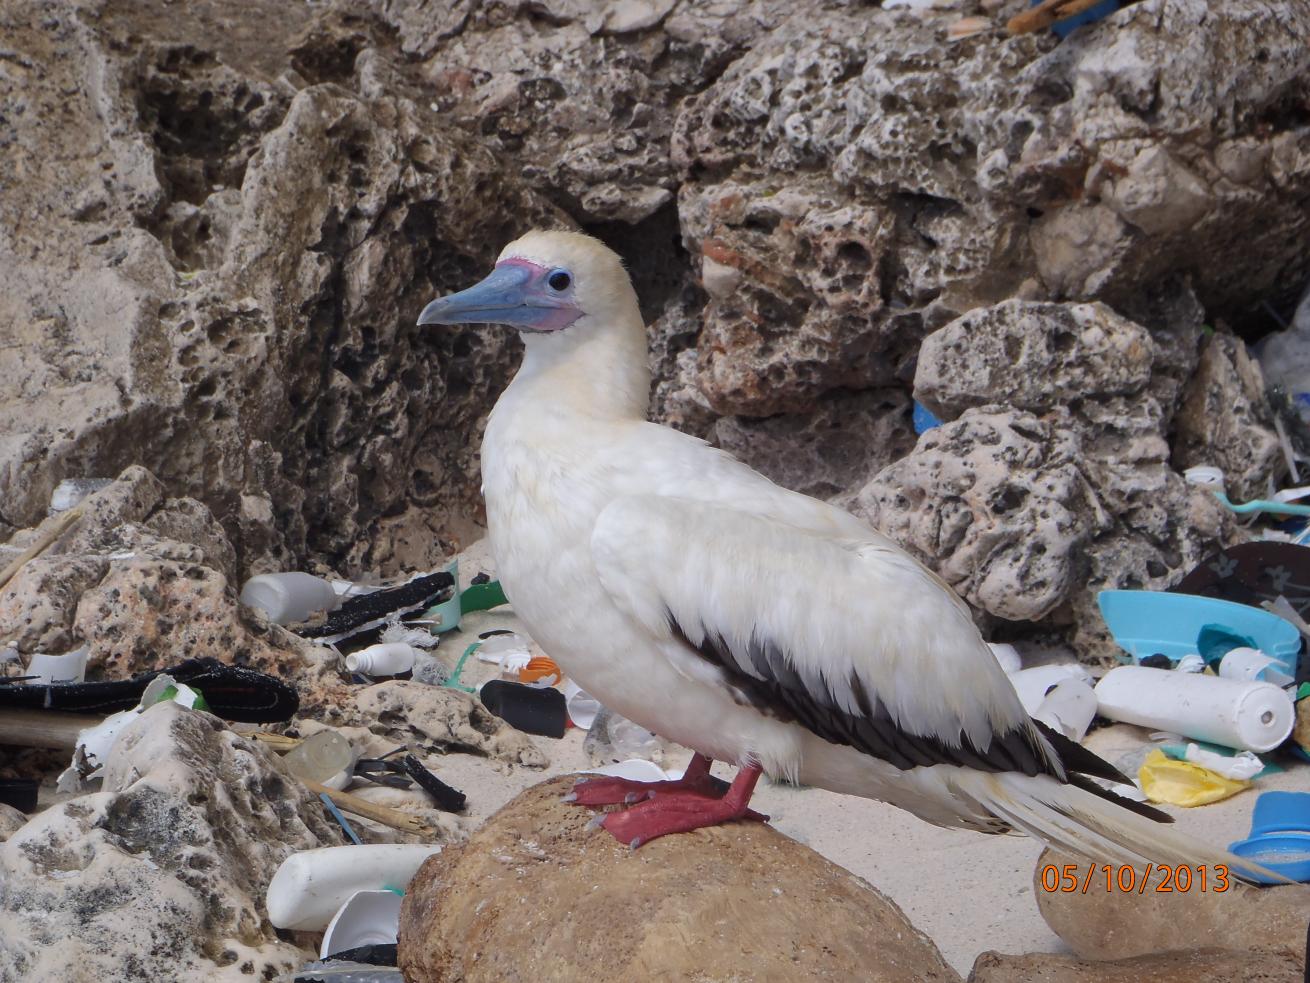 A red-footed booby on Christmas Island, in the Indian Ocean.